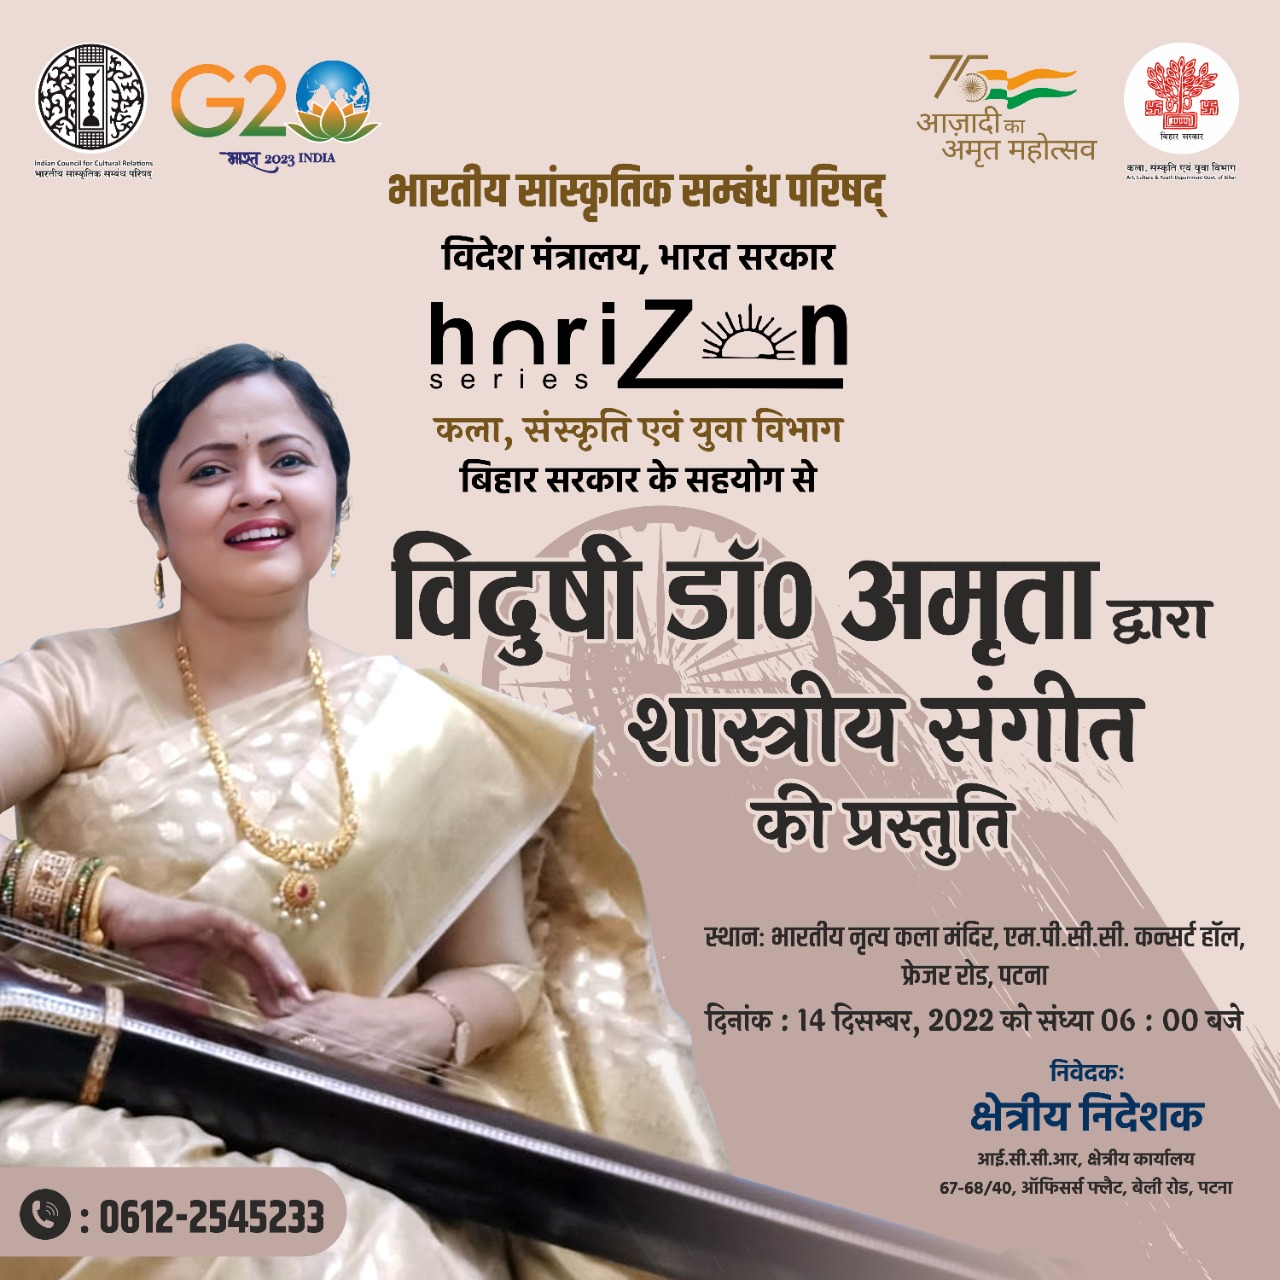 E-invitation letter for "Classical Music" program on December 14, 2022 under Horizon Series program by Indian Council for Cultural Relations, Regional Office Patna